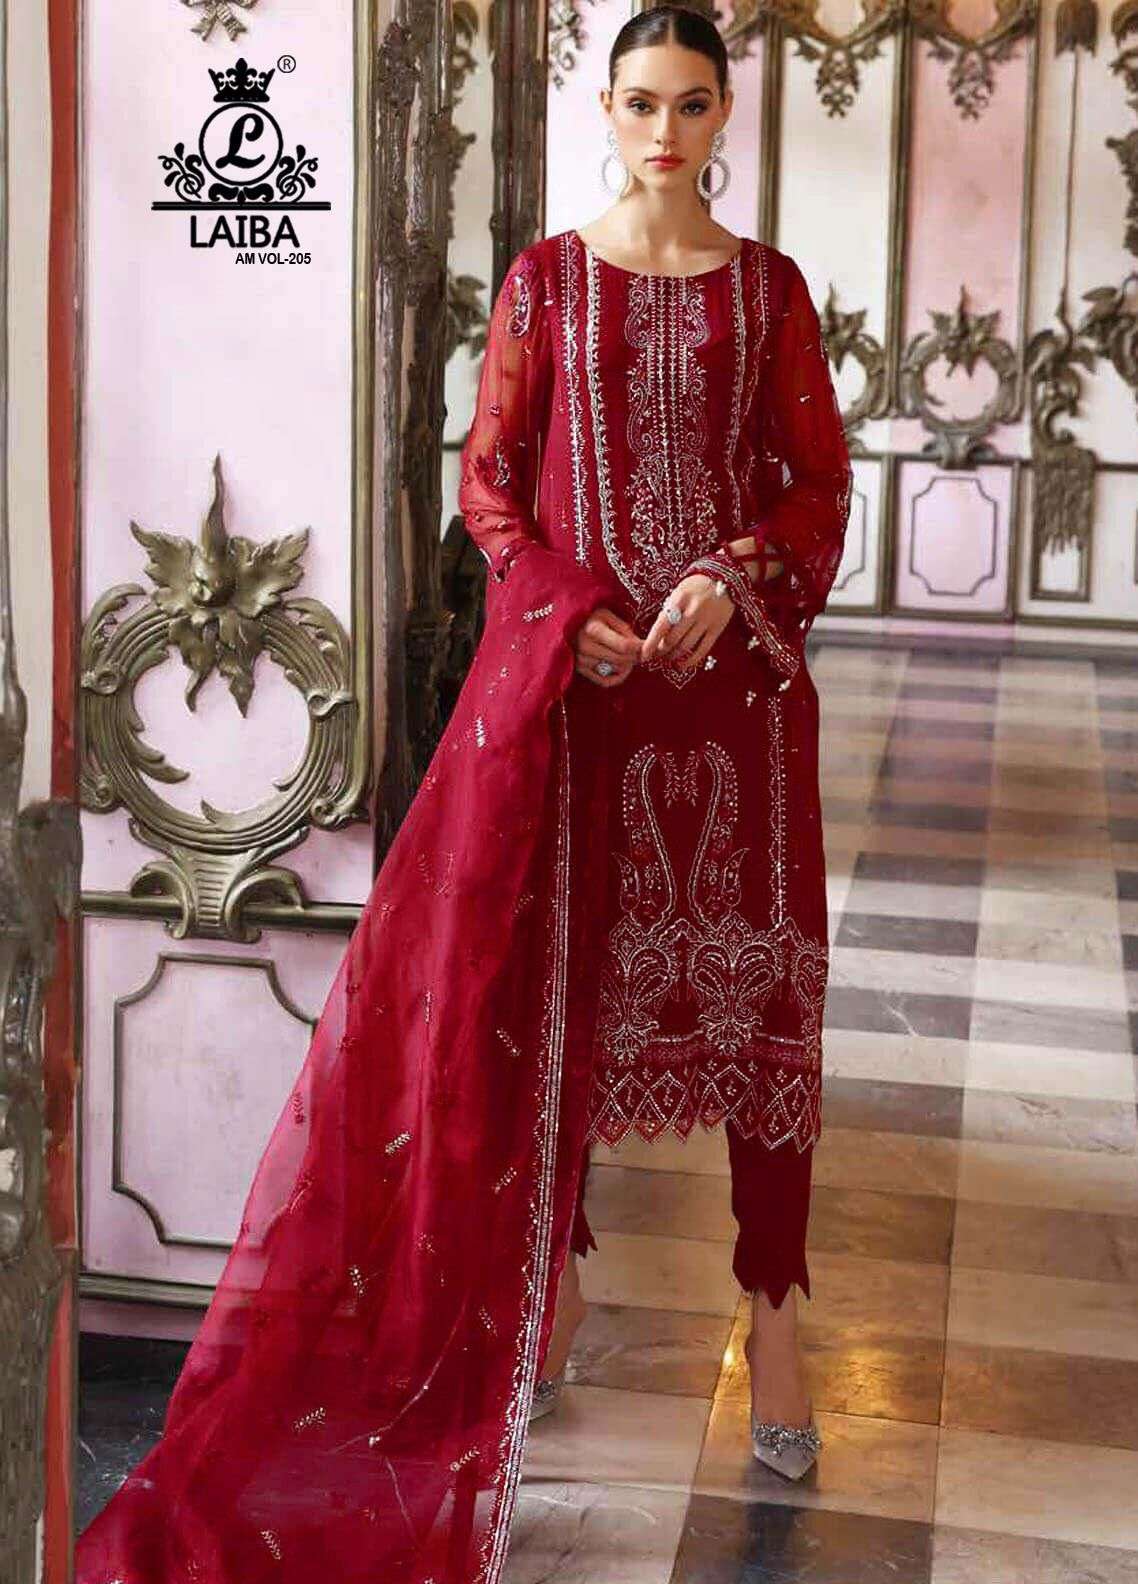 LSM Embroidered Kurti & Embroidered Trousers 2019 Collection